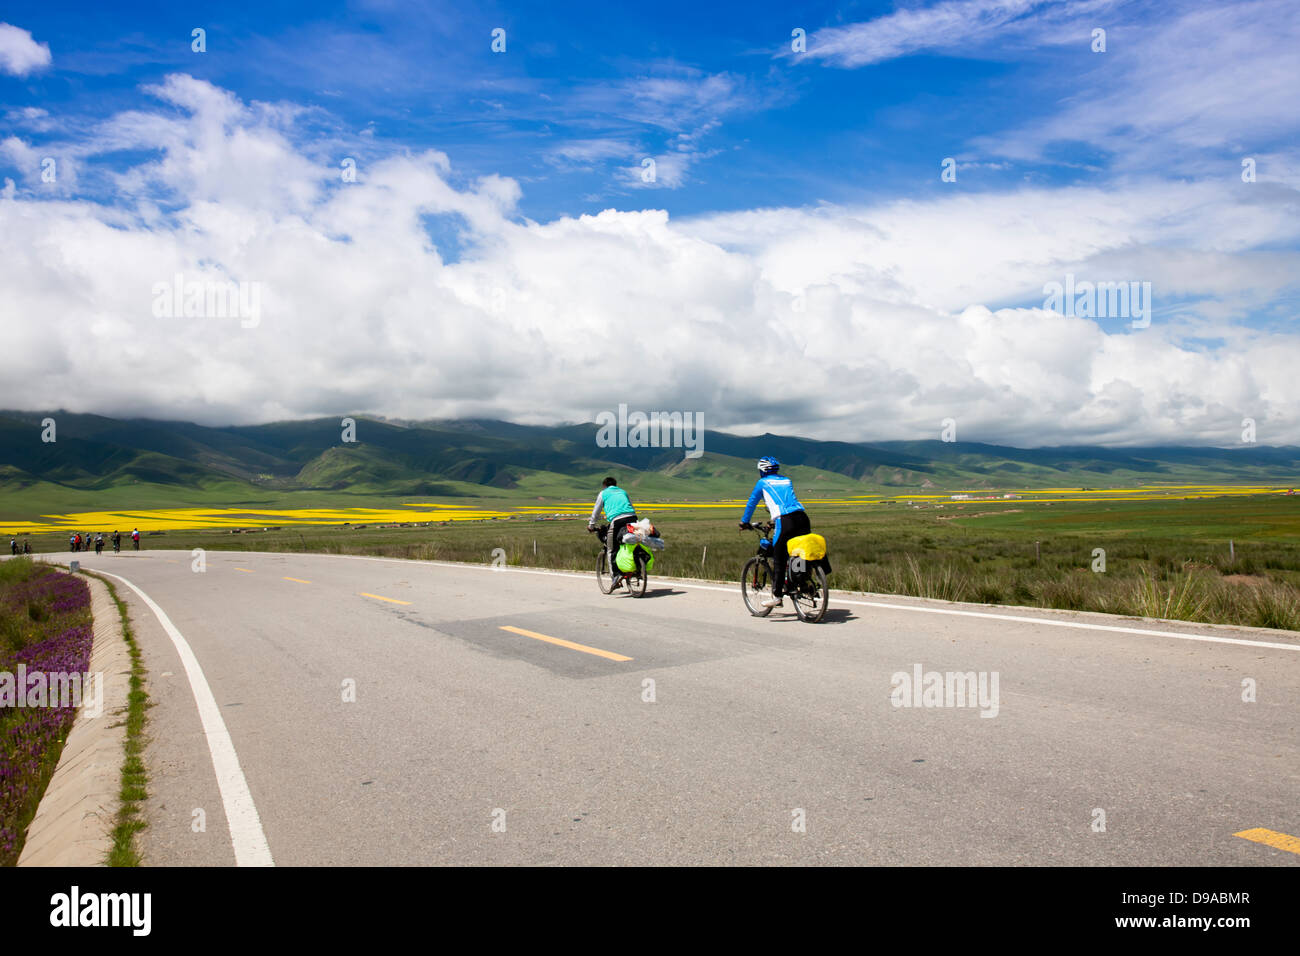 cyclists  riding bicycles outside Stock Photo